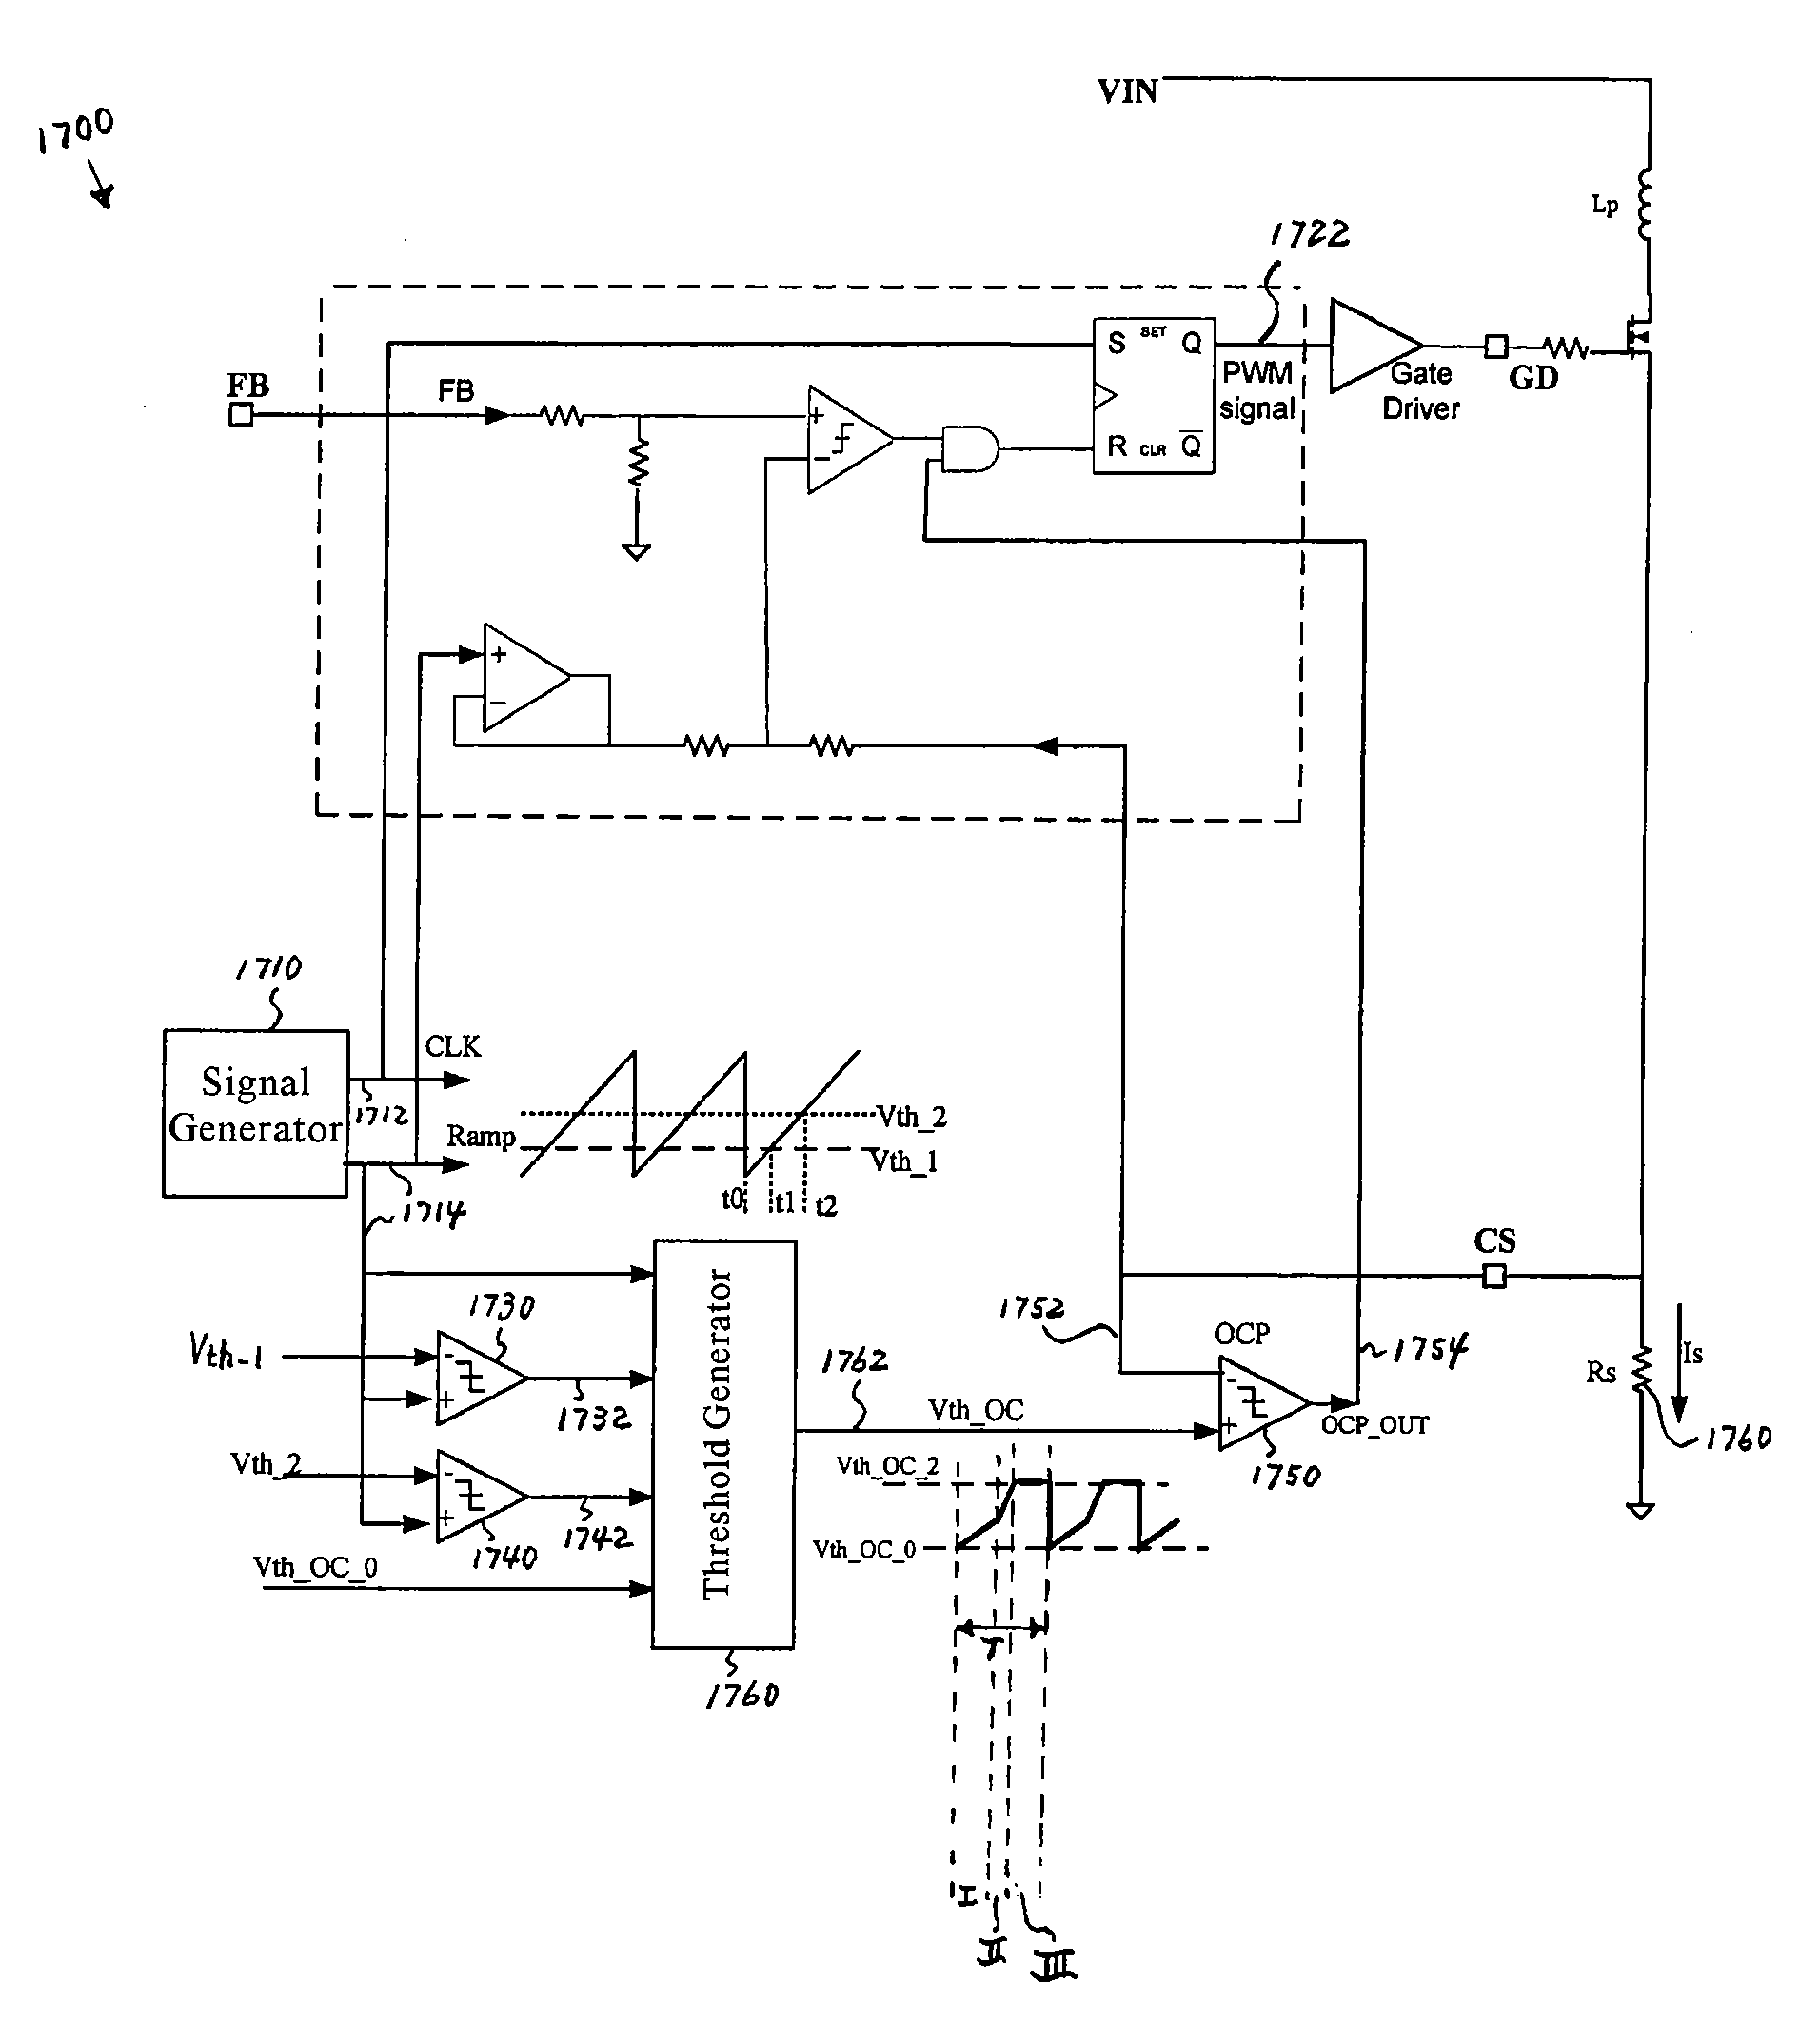 System and method providing over current and over power protection for power converter